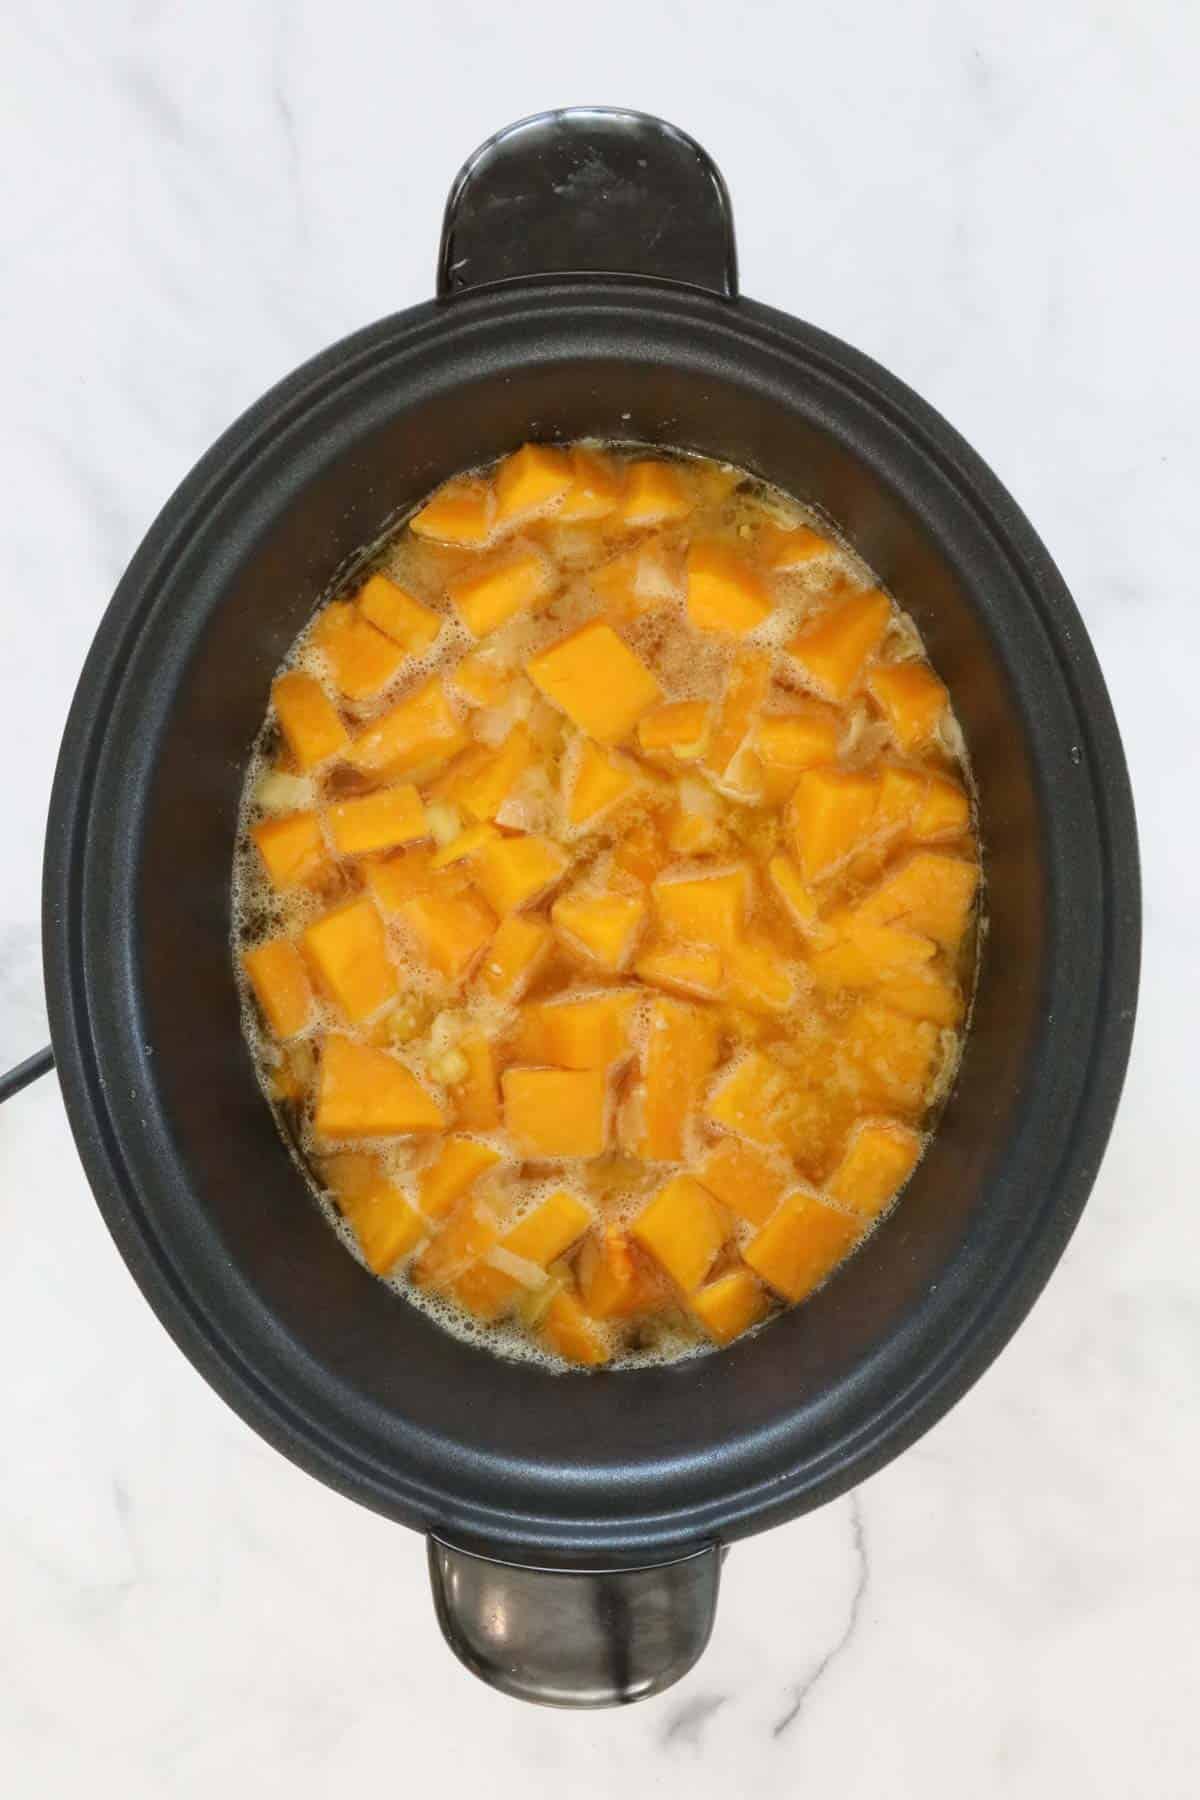 Cooked pumpkin, leek and stock in a slow cooker.